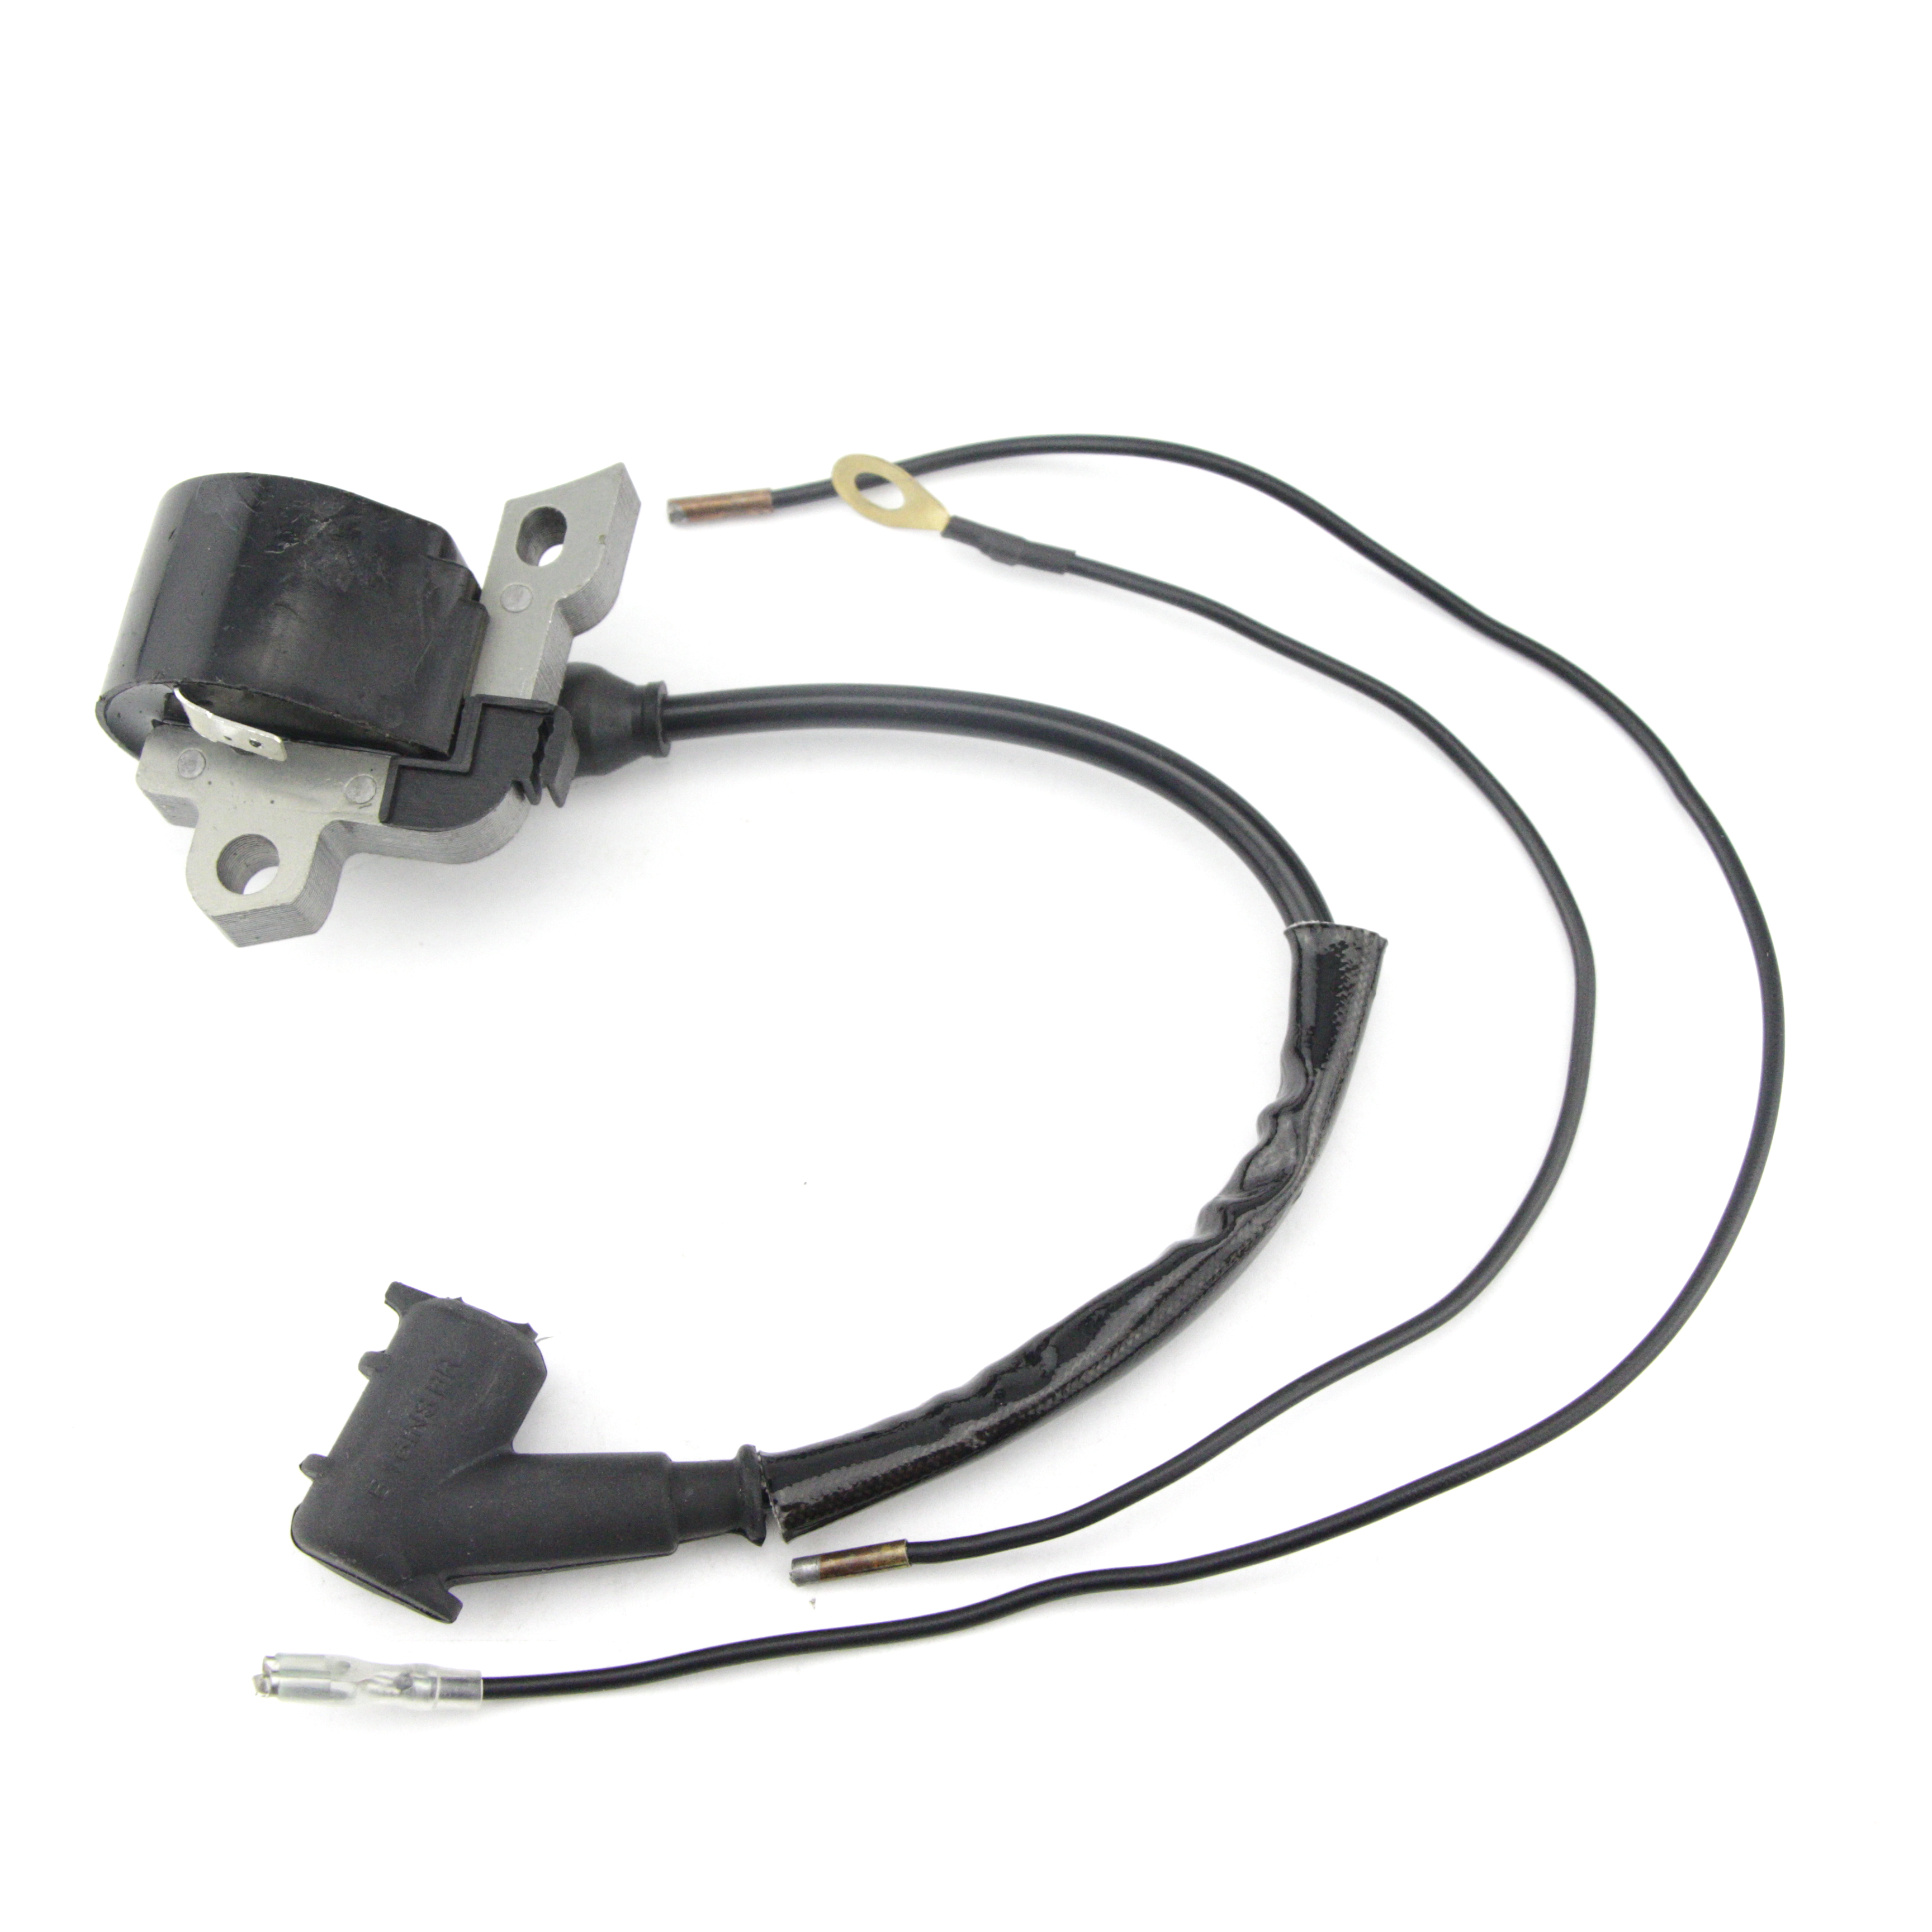 Dalom 0000 400 1300 Ignition Coil Module for Stihl 024 026 028 029 034 036 038 039 044 044MAG MS290 MS390 MS440 MS640 Chainsaw 